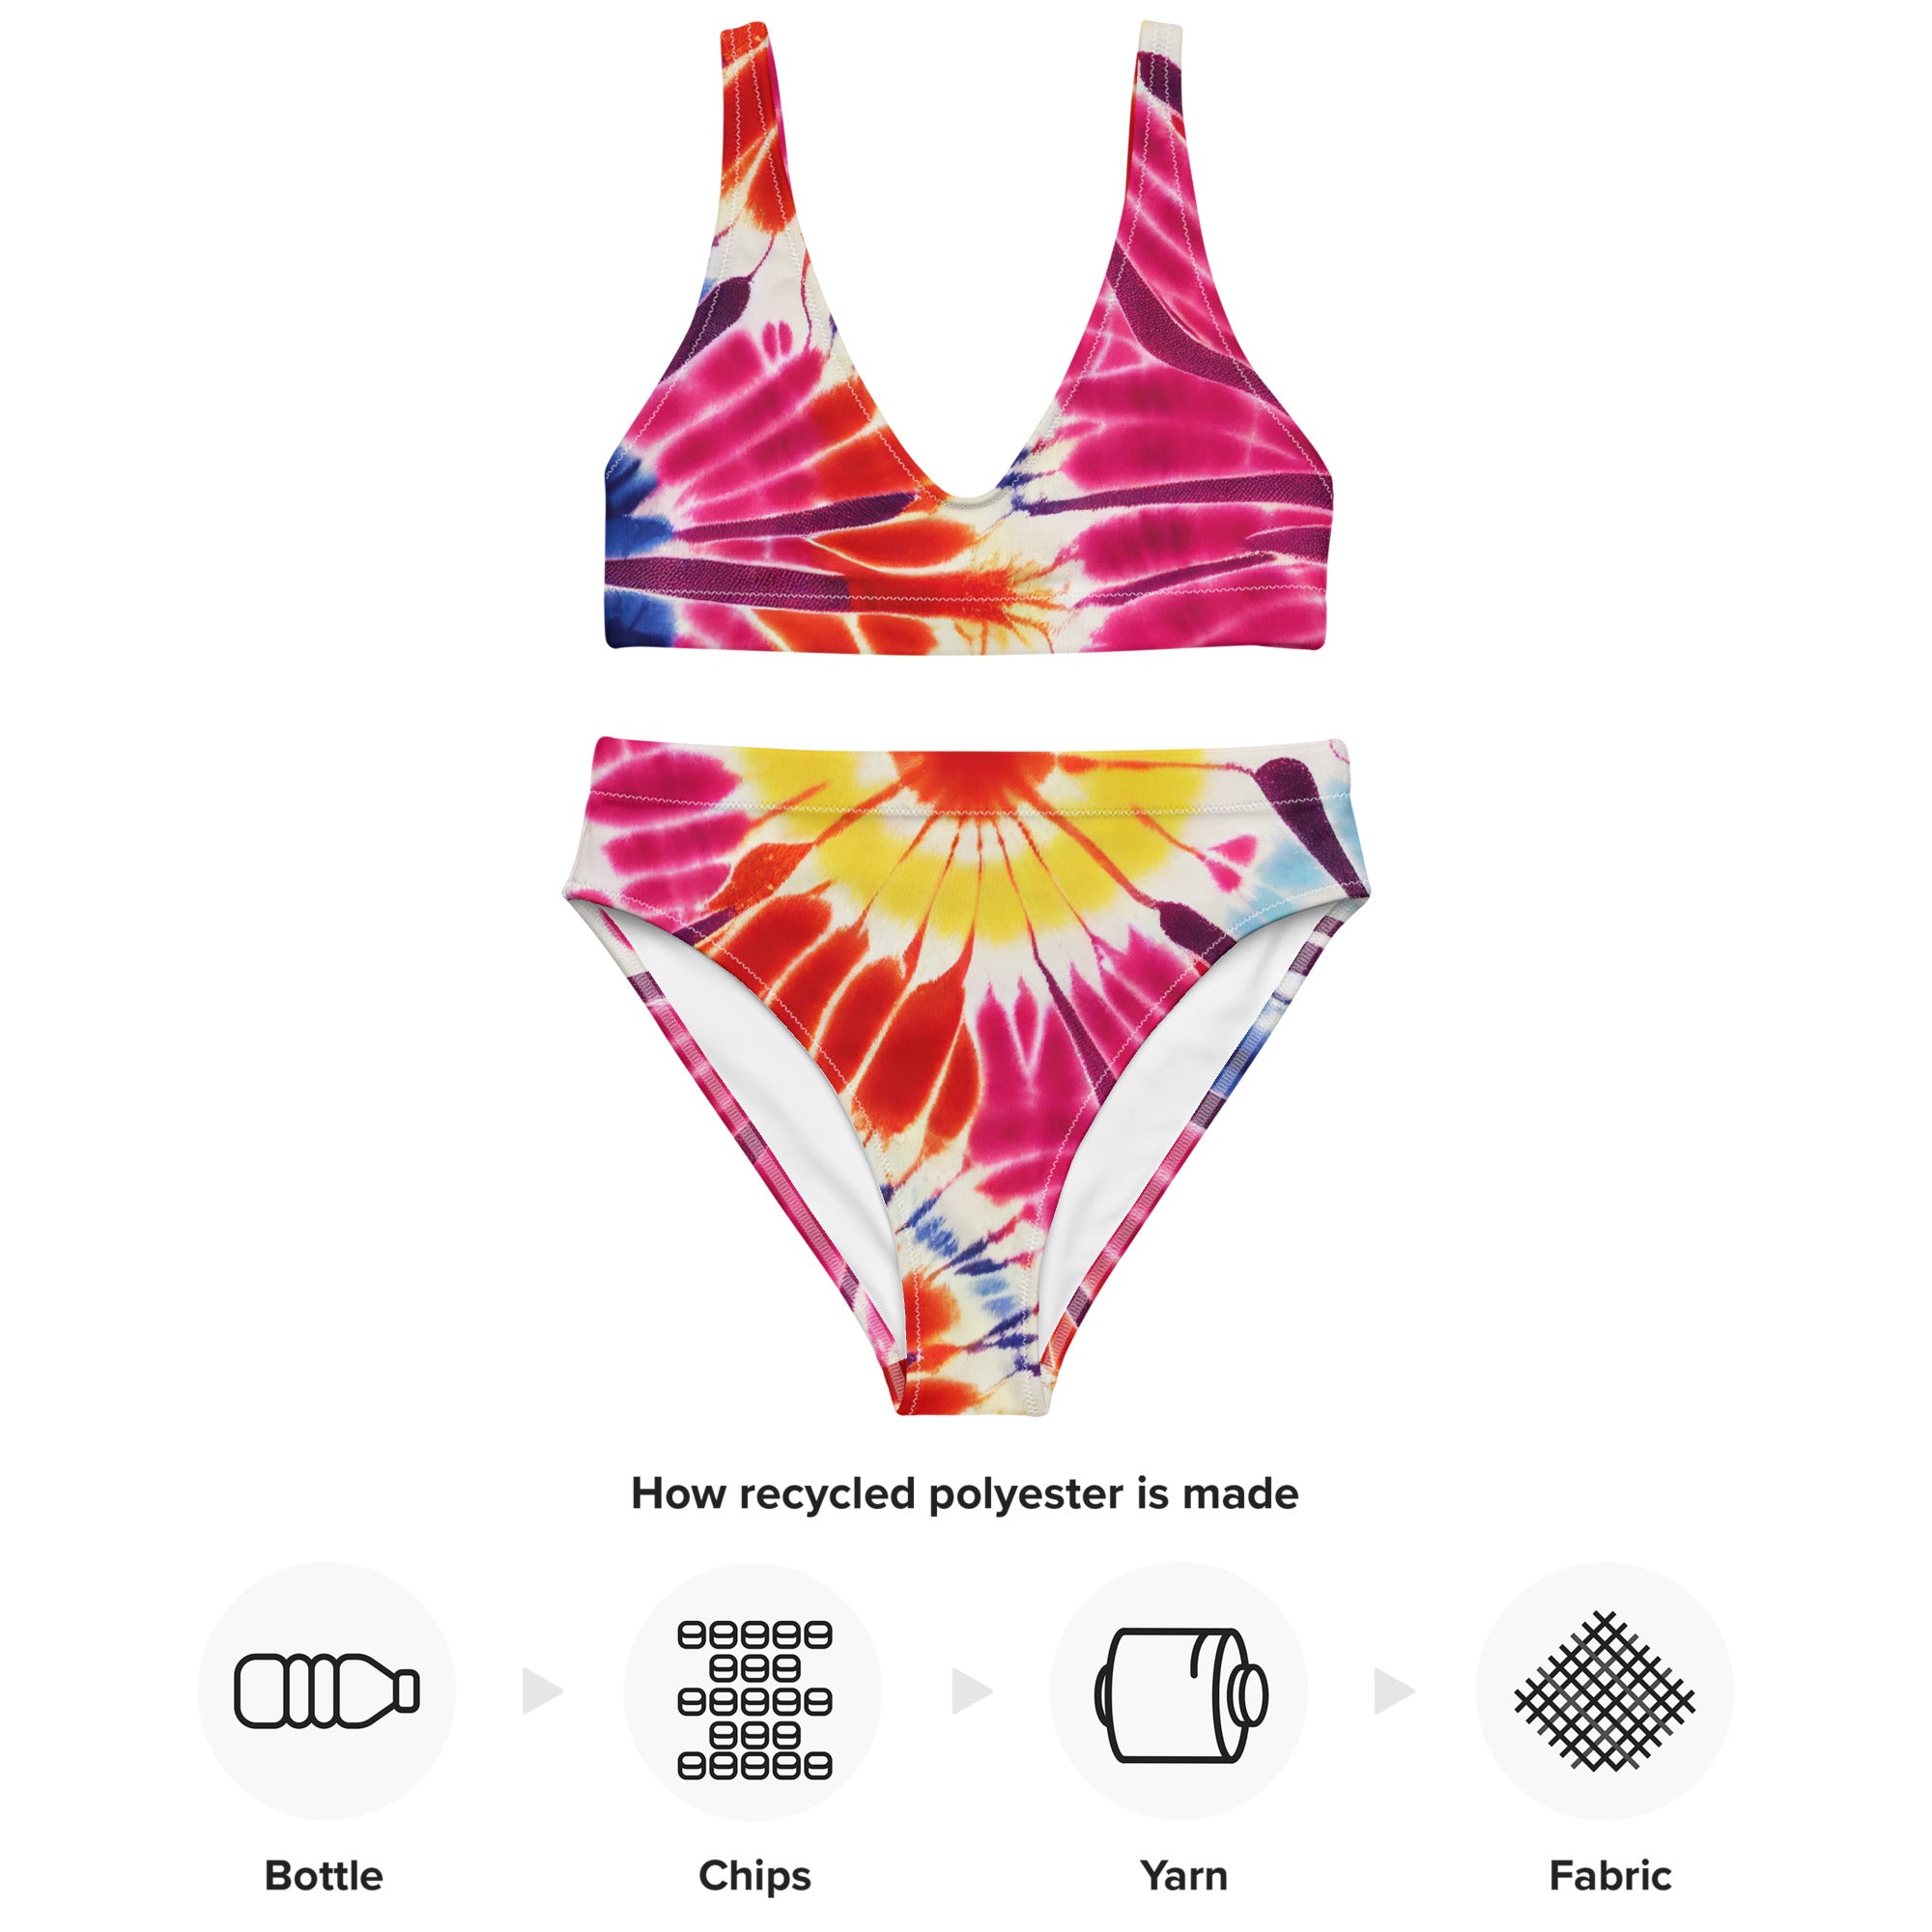 Recycled high-waisted bikini- Floral Tie dye Pattern 03